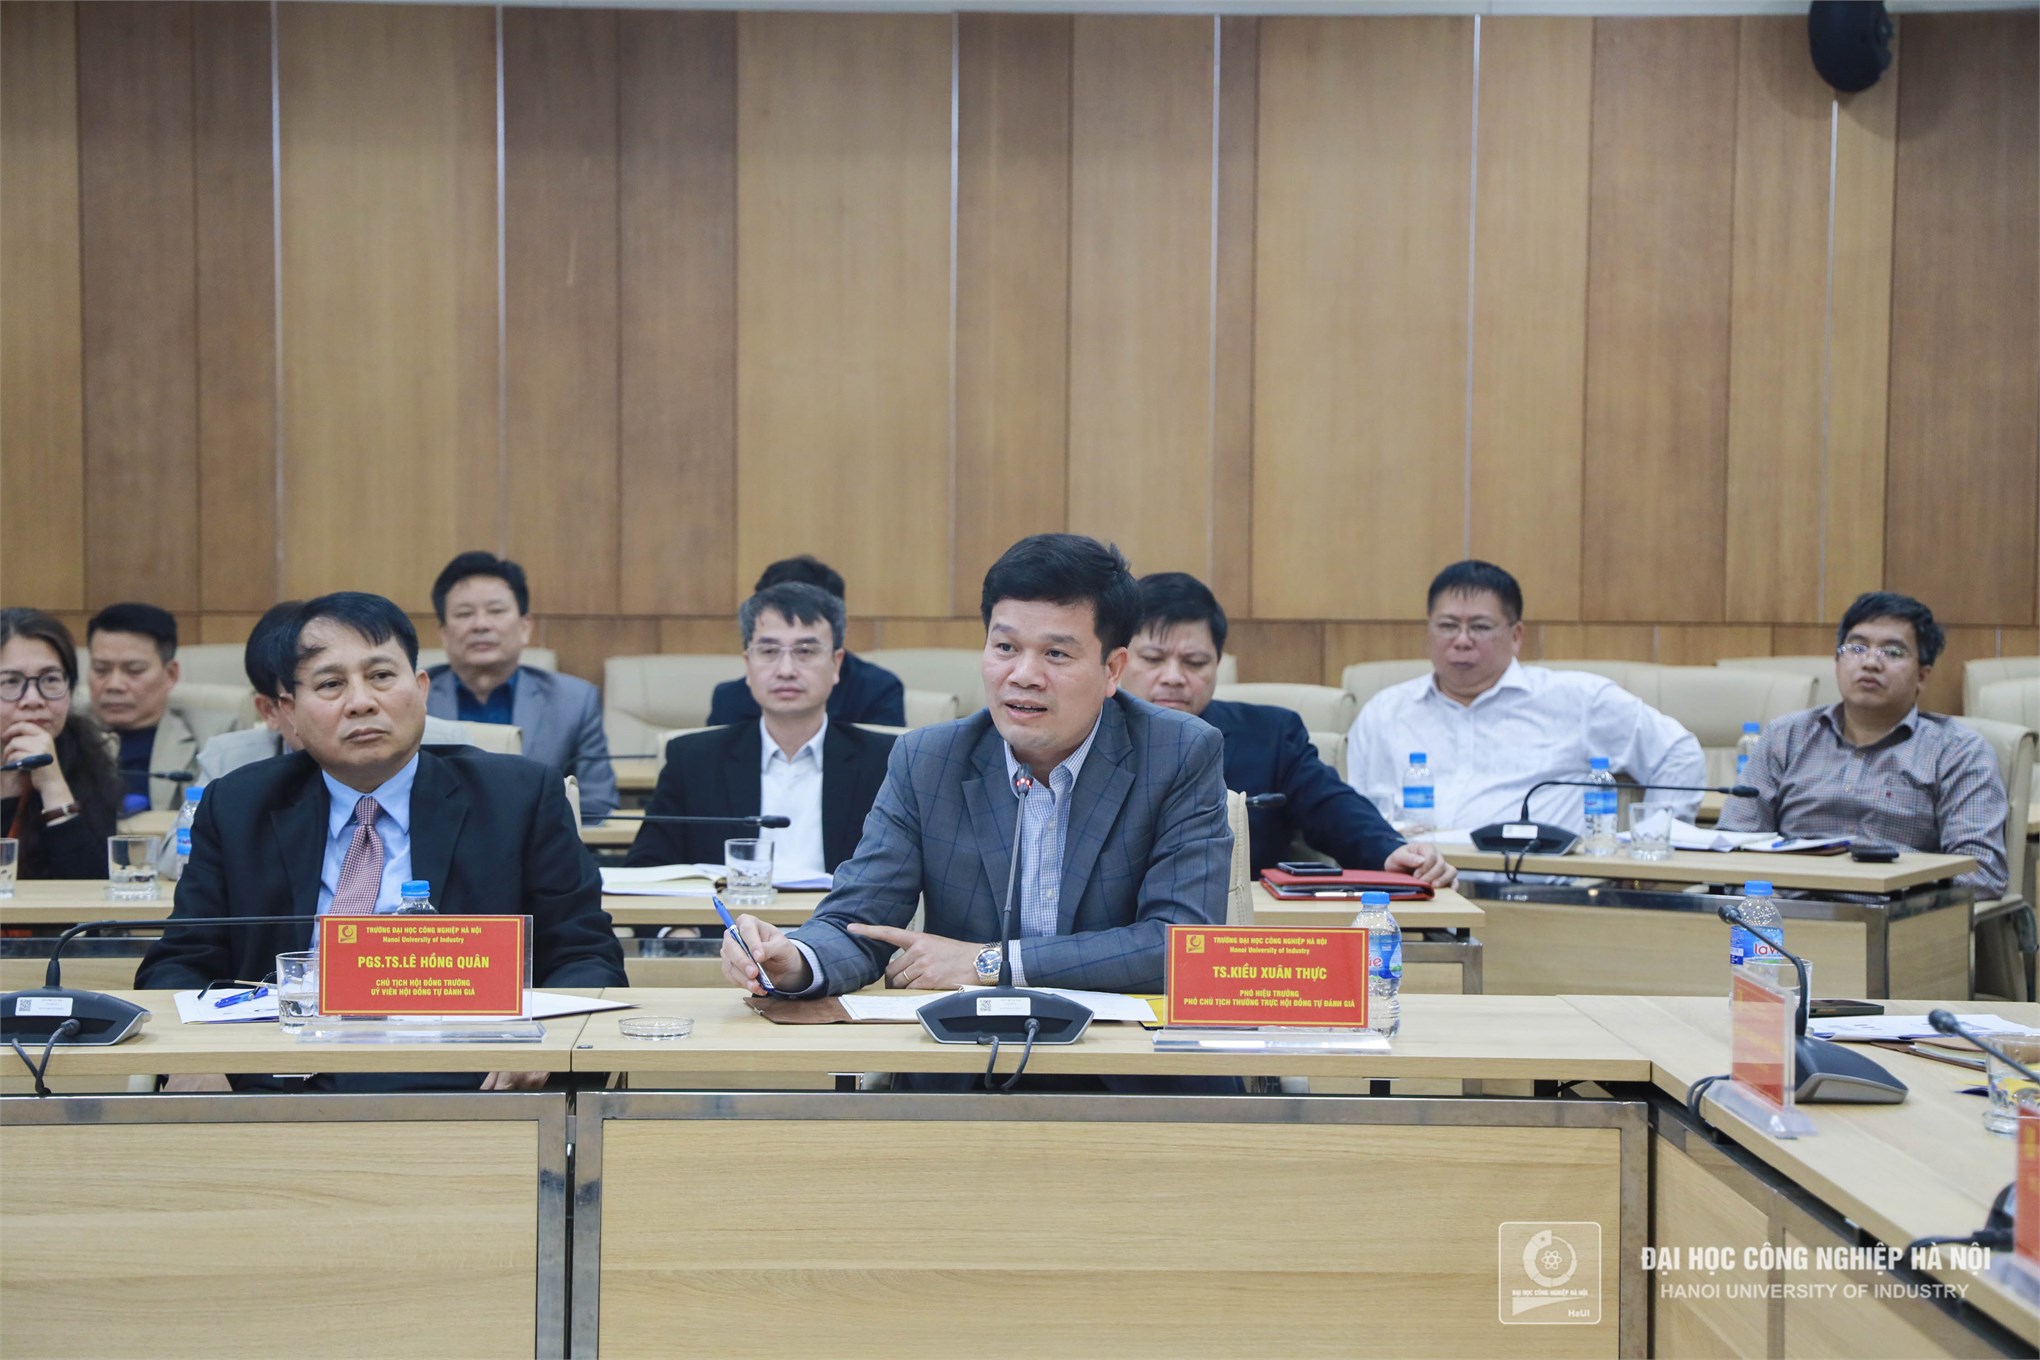 Review conference of IT management system project according to the e-university model